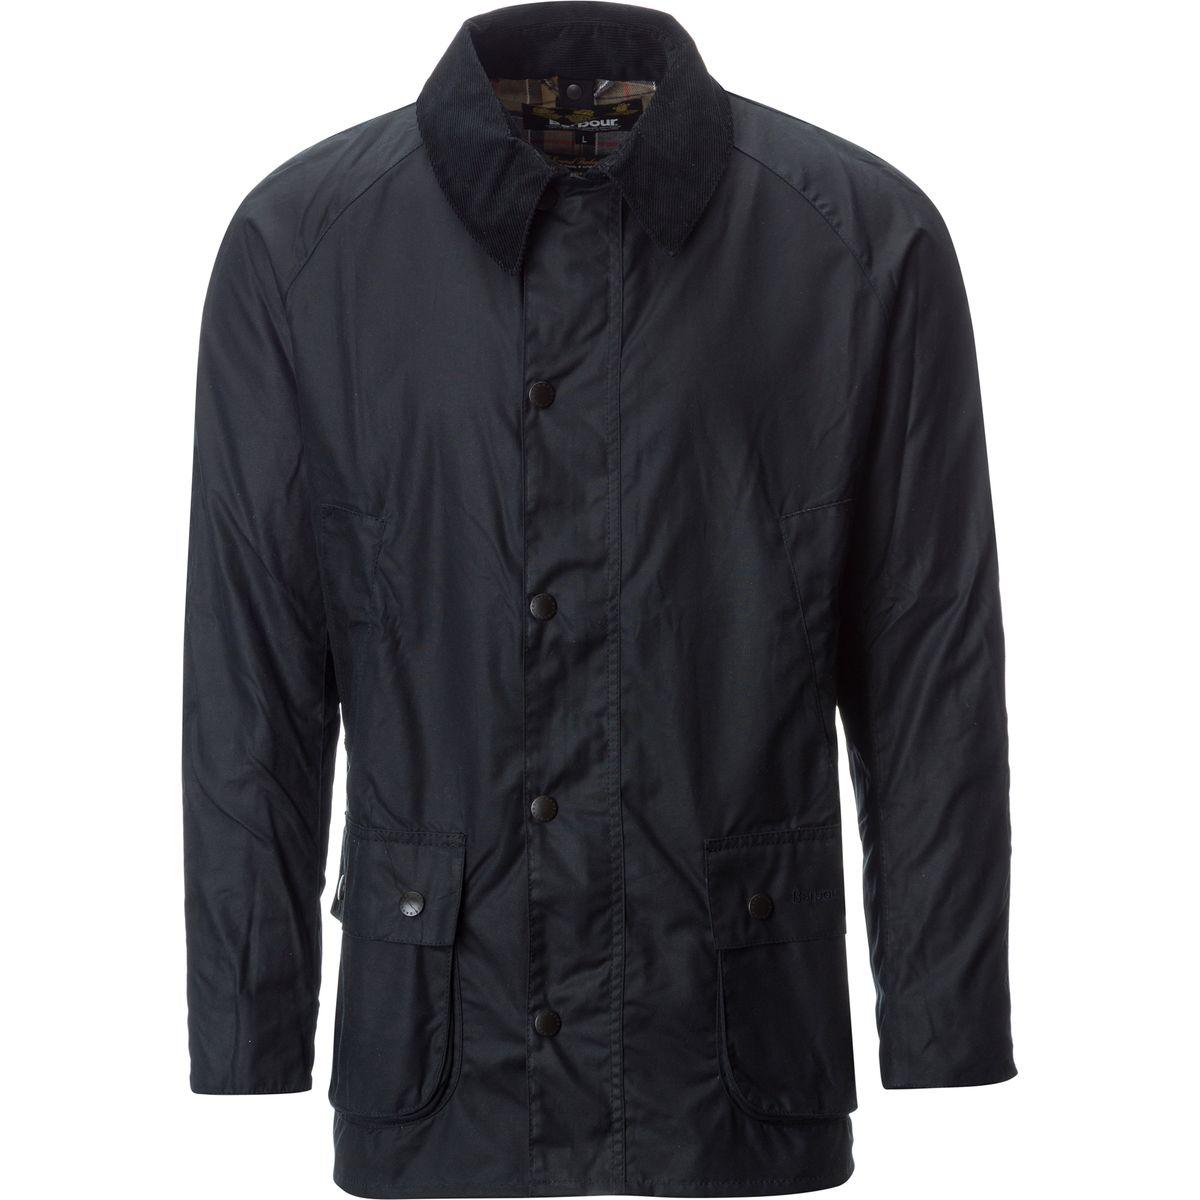 Barbour Cotton Ashby Wax Jacket in Navy (Blue) for Men - Lyst